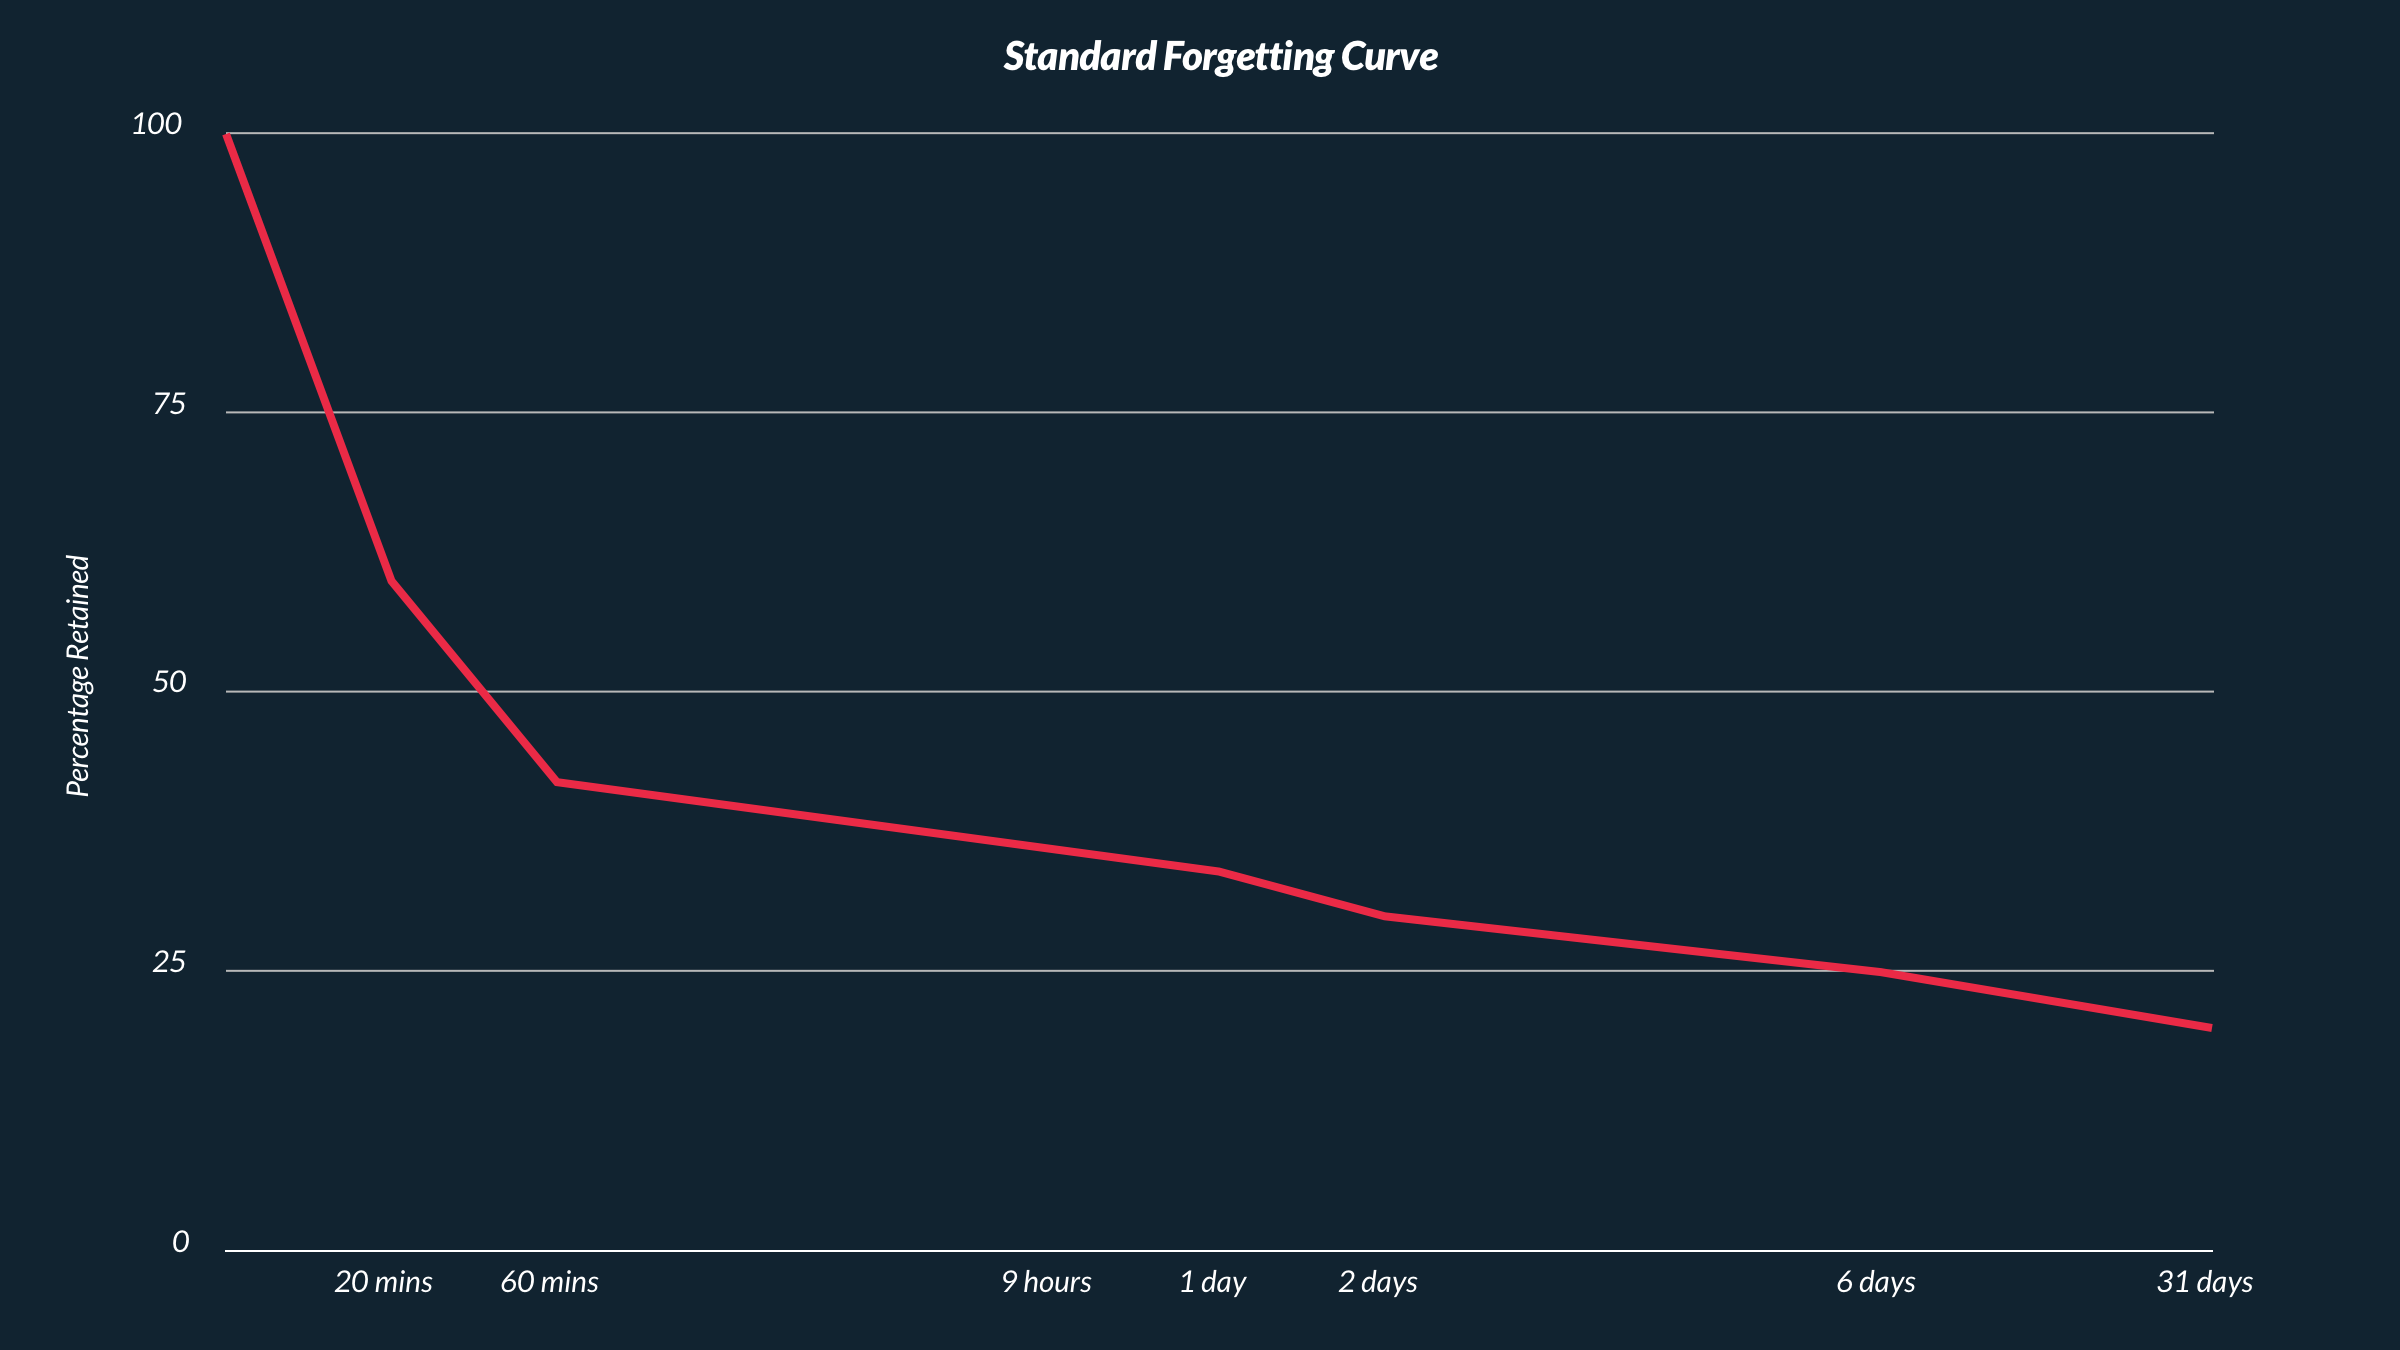 graph showing the standard forgetting curve